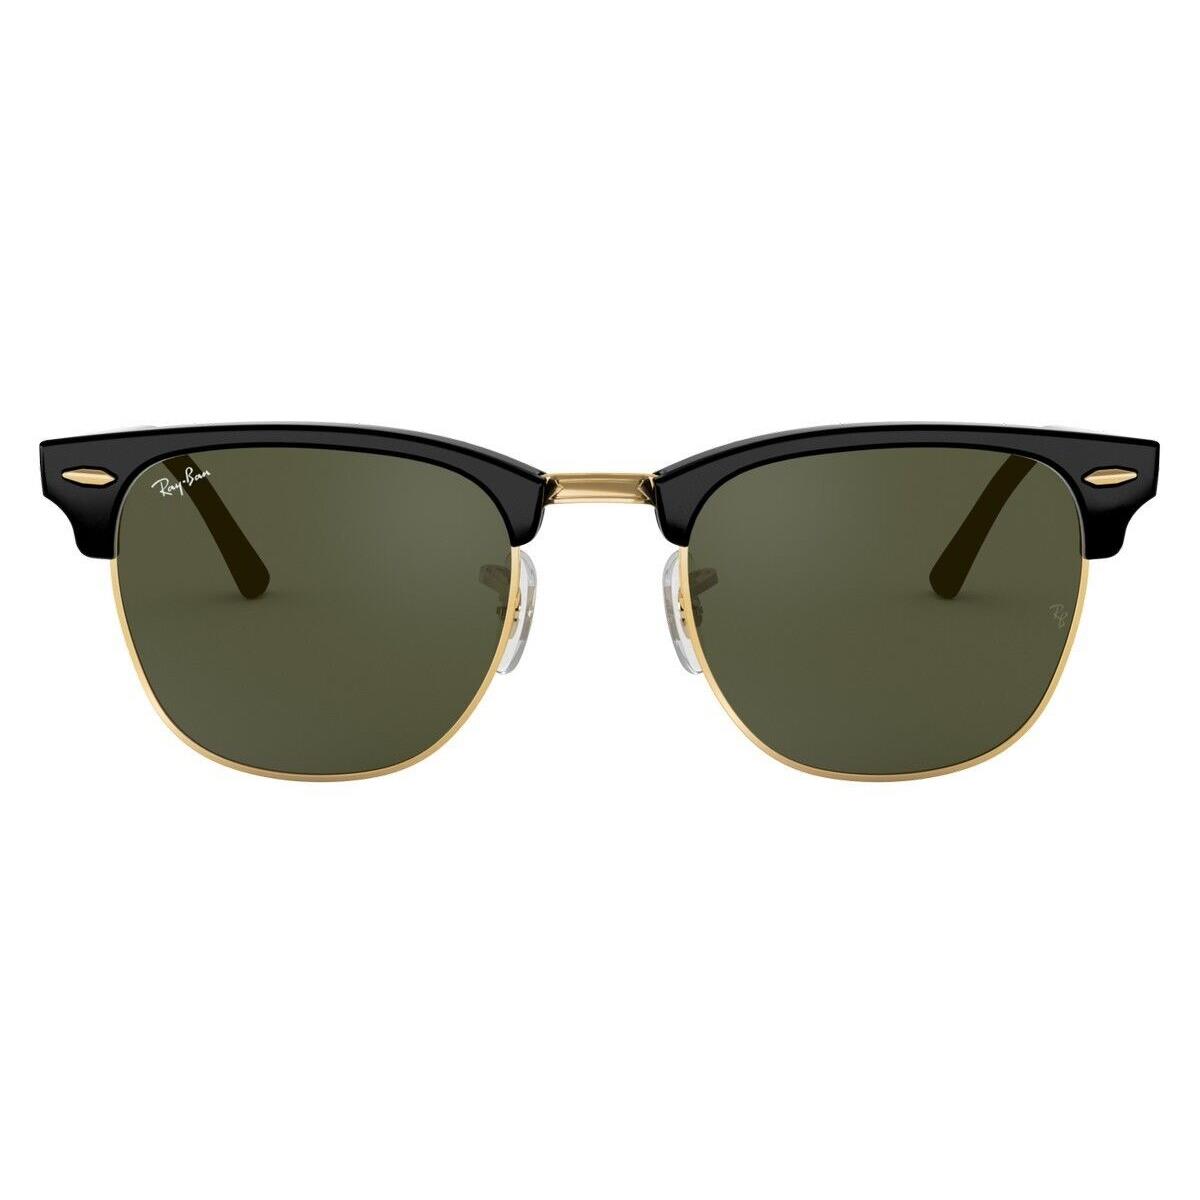 Ray-ban RB3016 W0365 Clubmaster Sunglasses - Frame: Black on Arista, Lens: Green